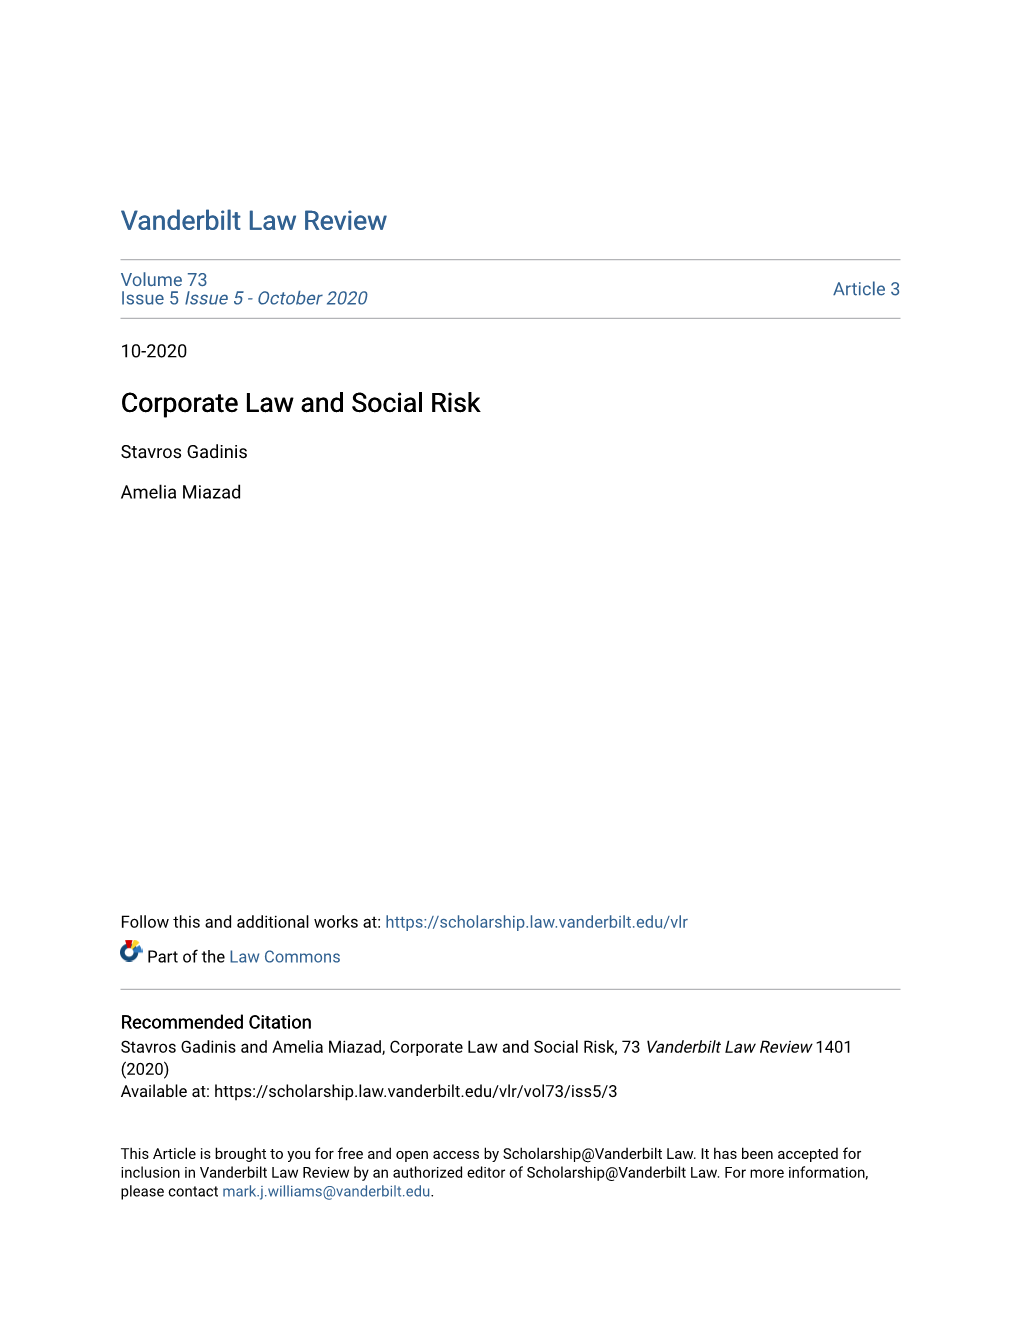 Corporate Law and Social Risk